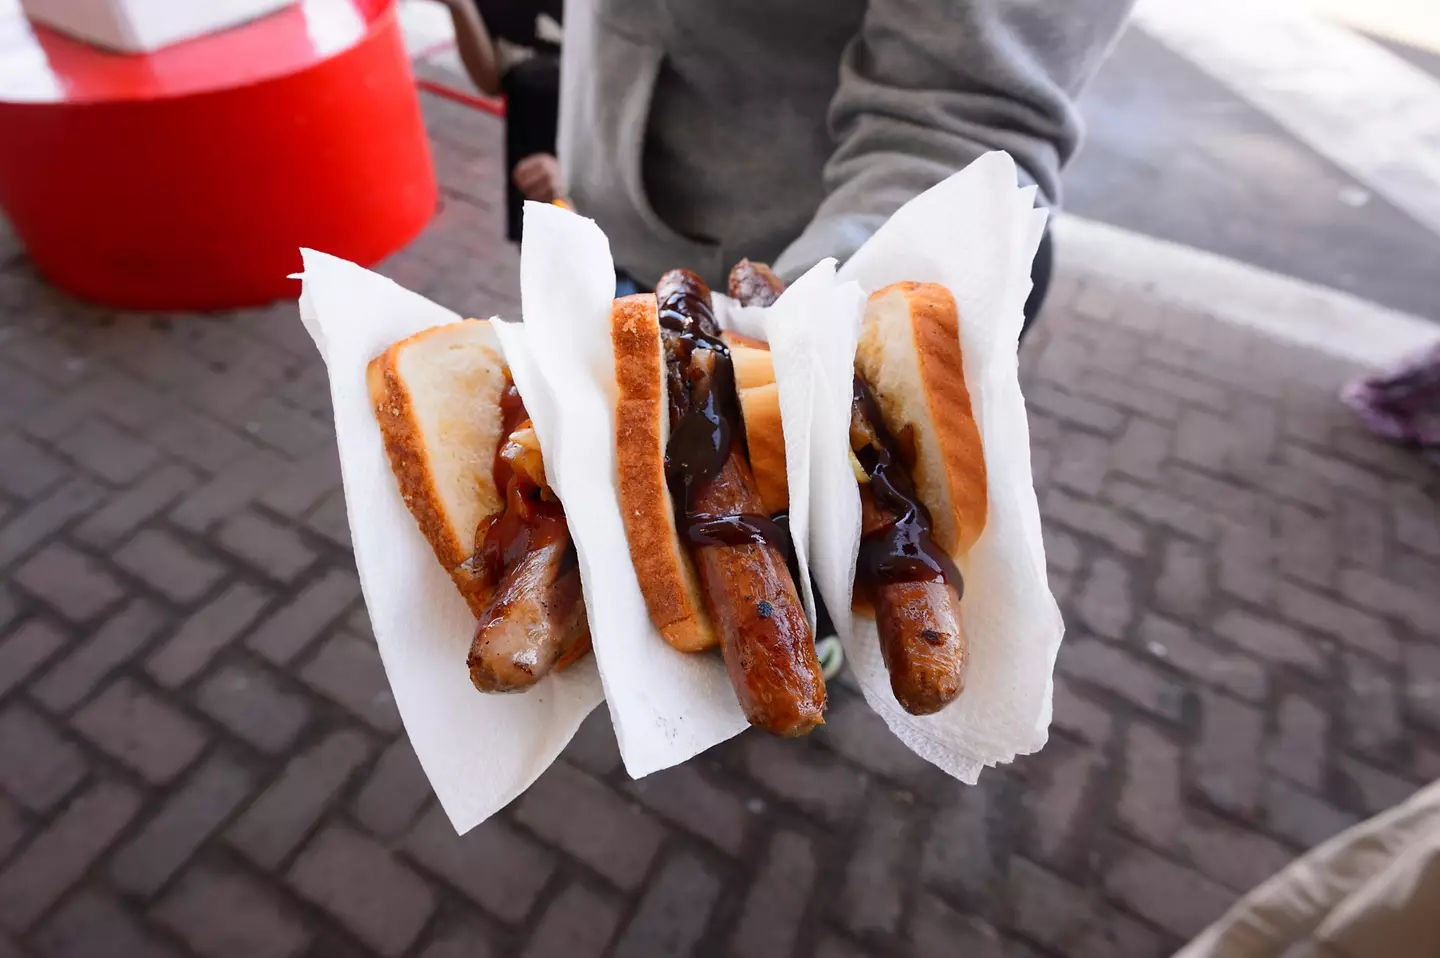 BUT WHAT ABOUT A BUNNINGS SNAG? Well, read on.